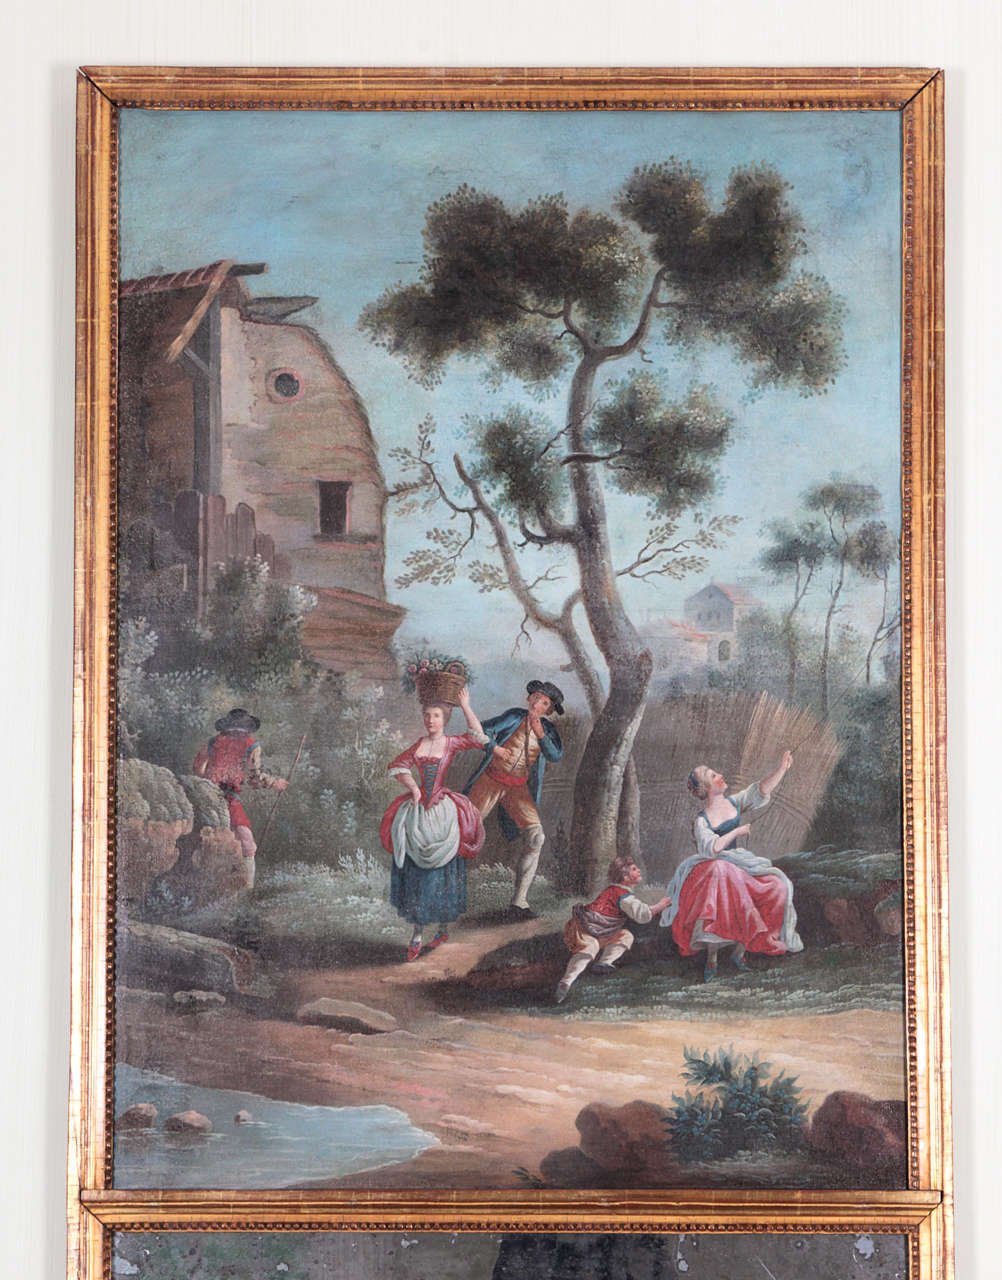 Each inset with canvas panel painted with charming pastoral scene with 18th century figures frolicking in a bucolic landscape; the mirror plate with oxidation (note mirror plate is also reflecting contents of room in photos - it is more evenly and